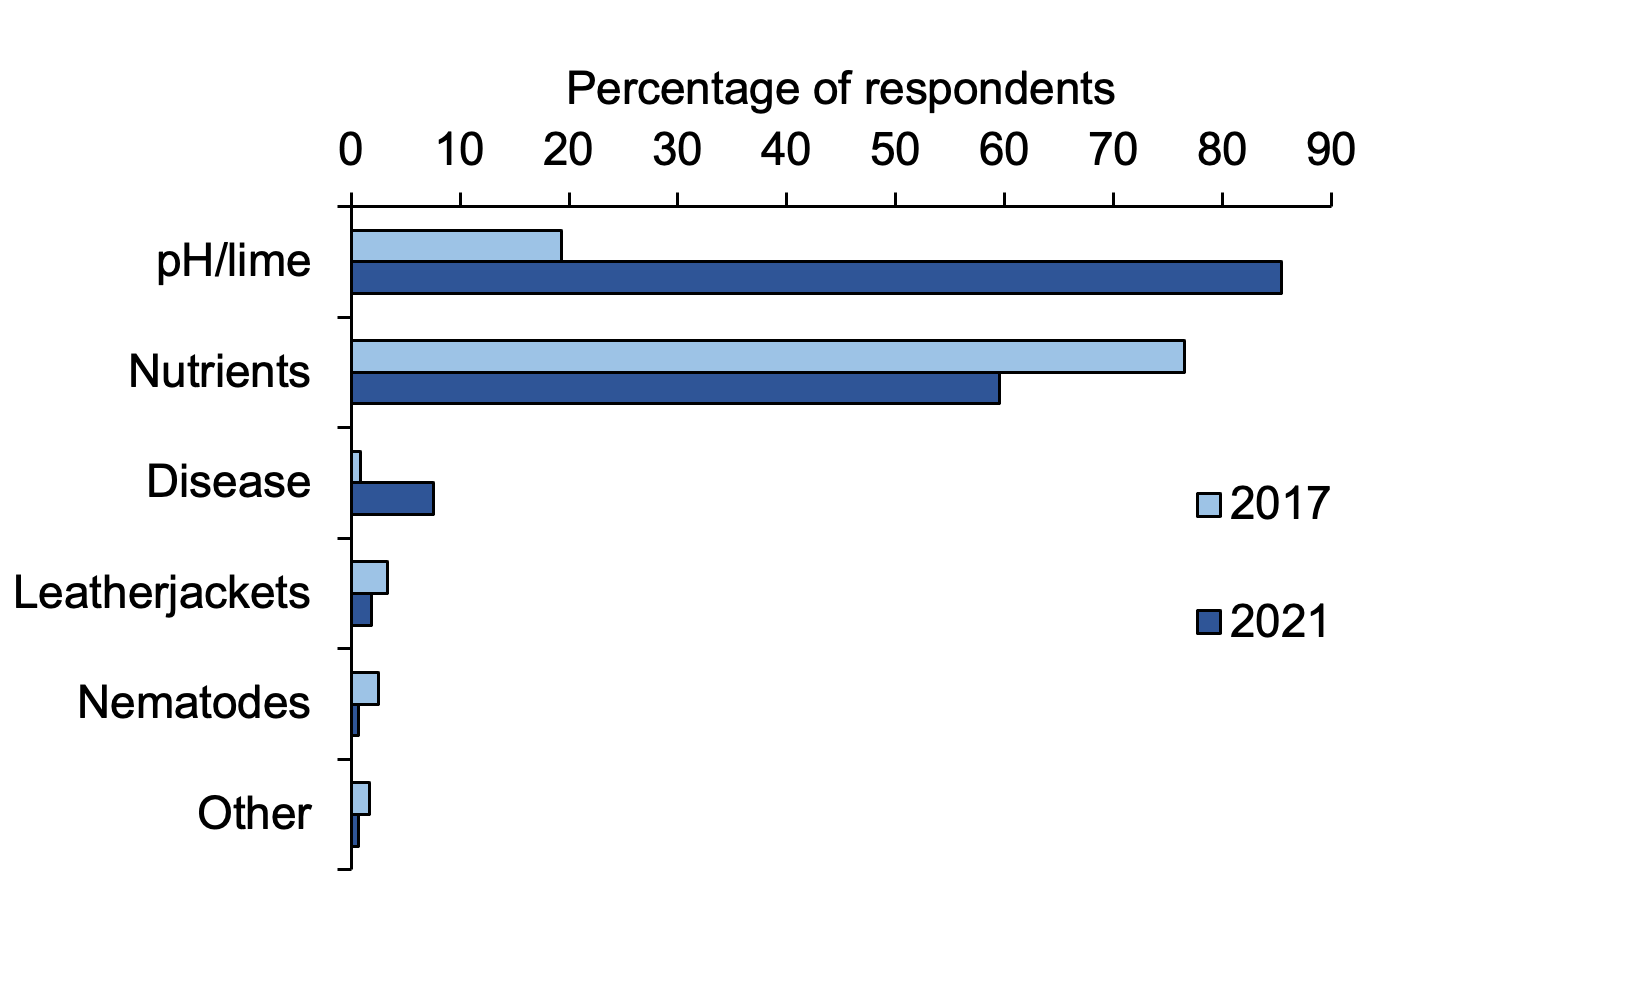 IPM: Bar chart of percentage responses to questions about soil testing where pH and lime testing is most common in 2021.